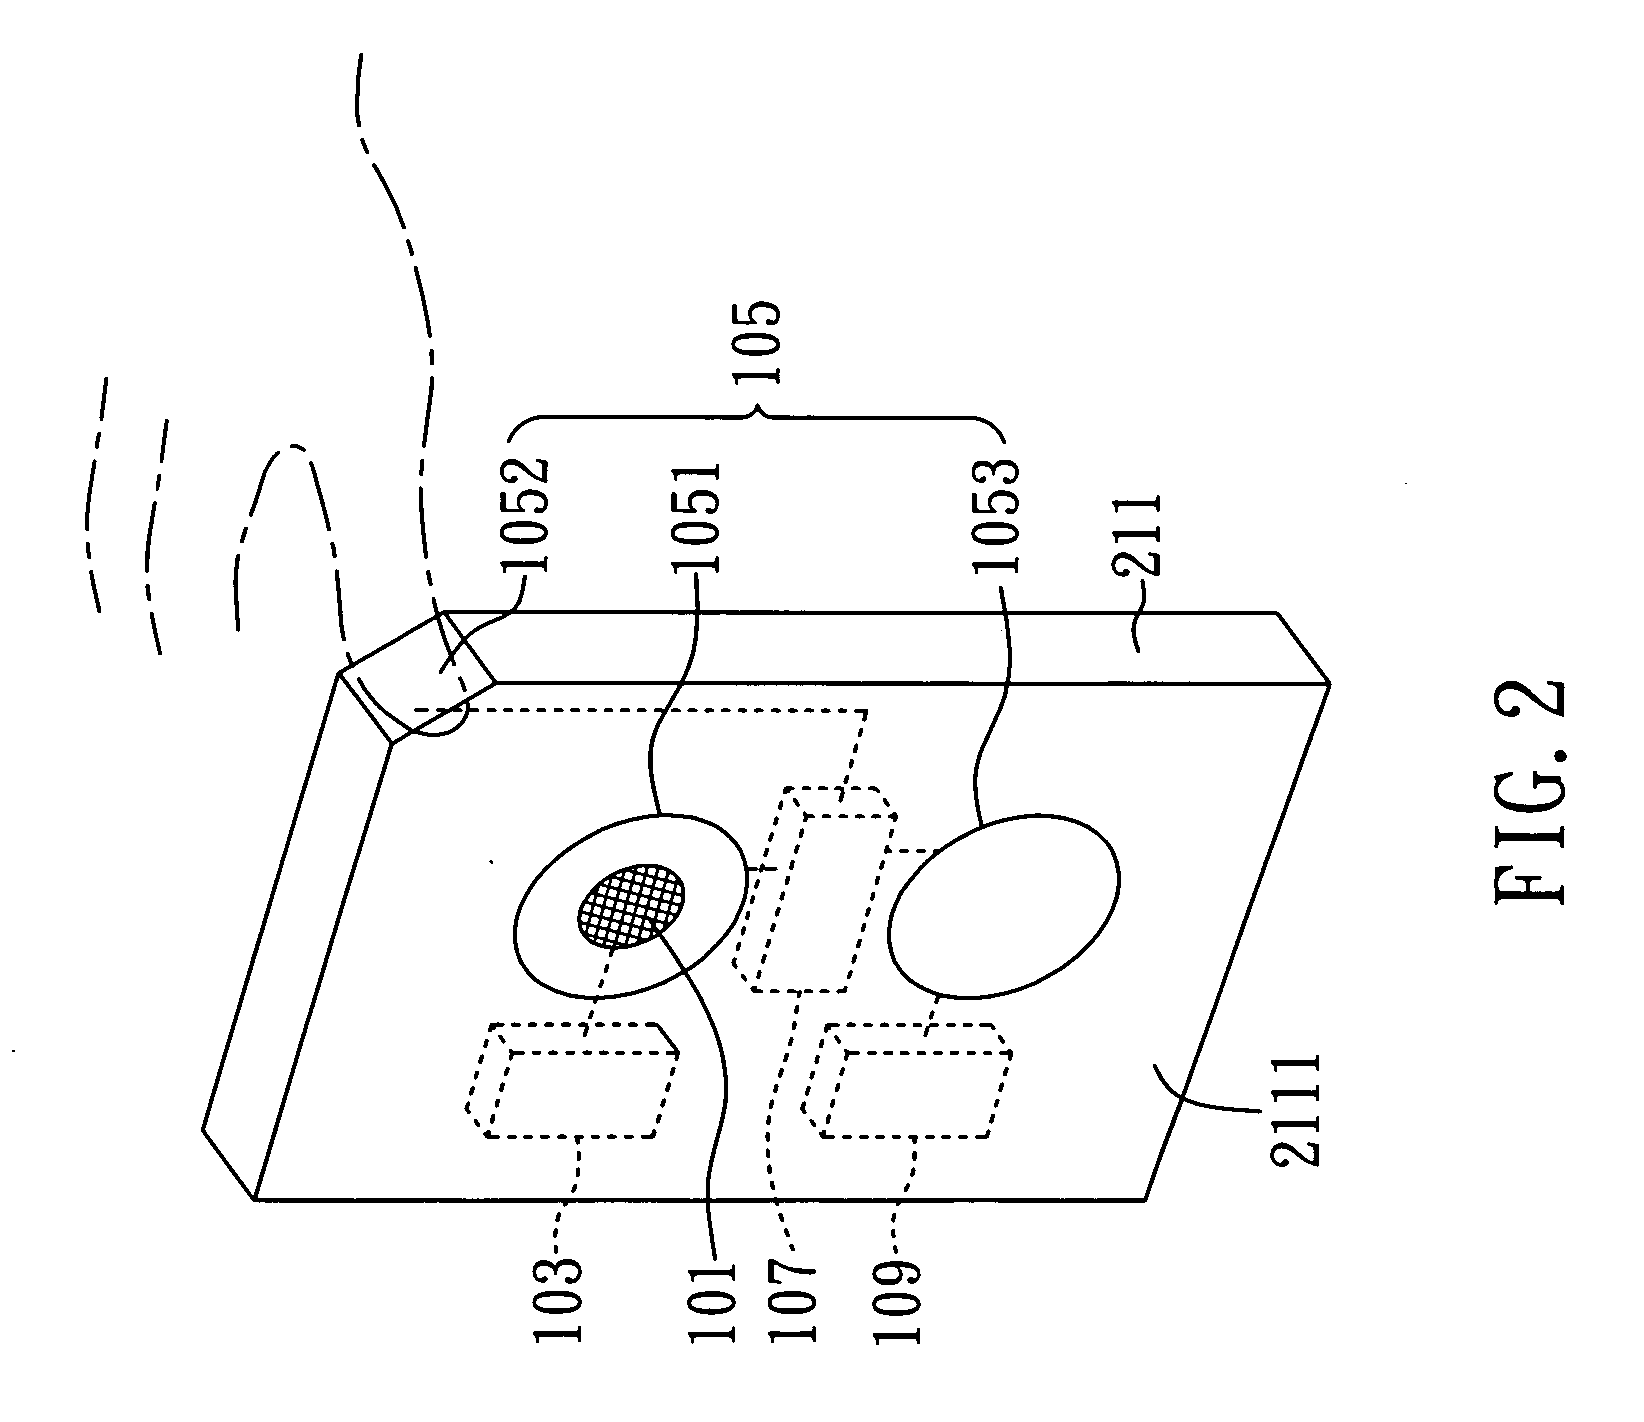 System apparatus for monitoring heart and lung functions